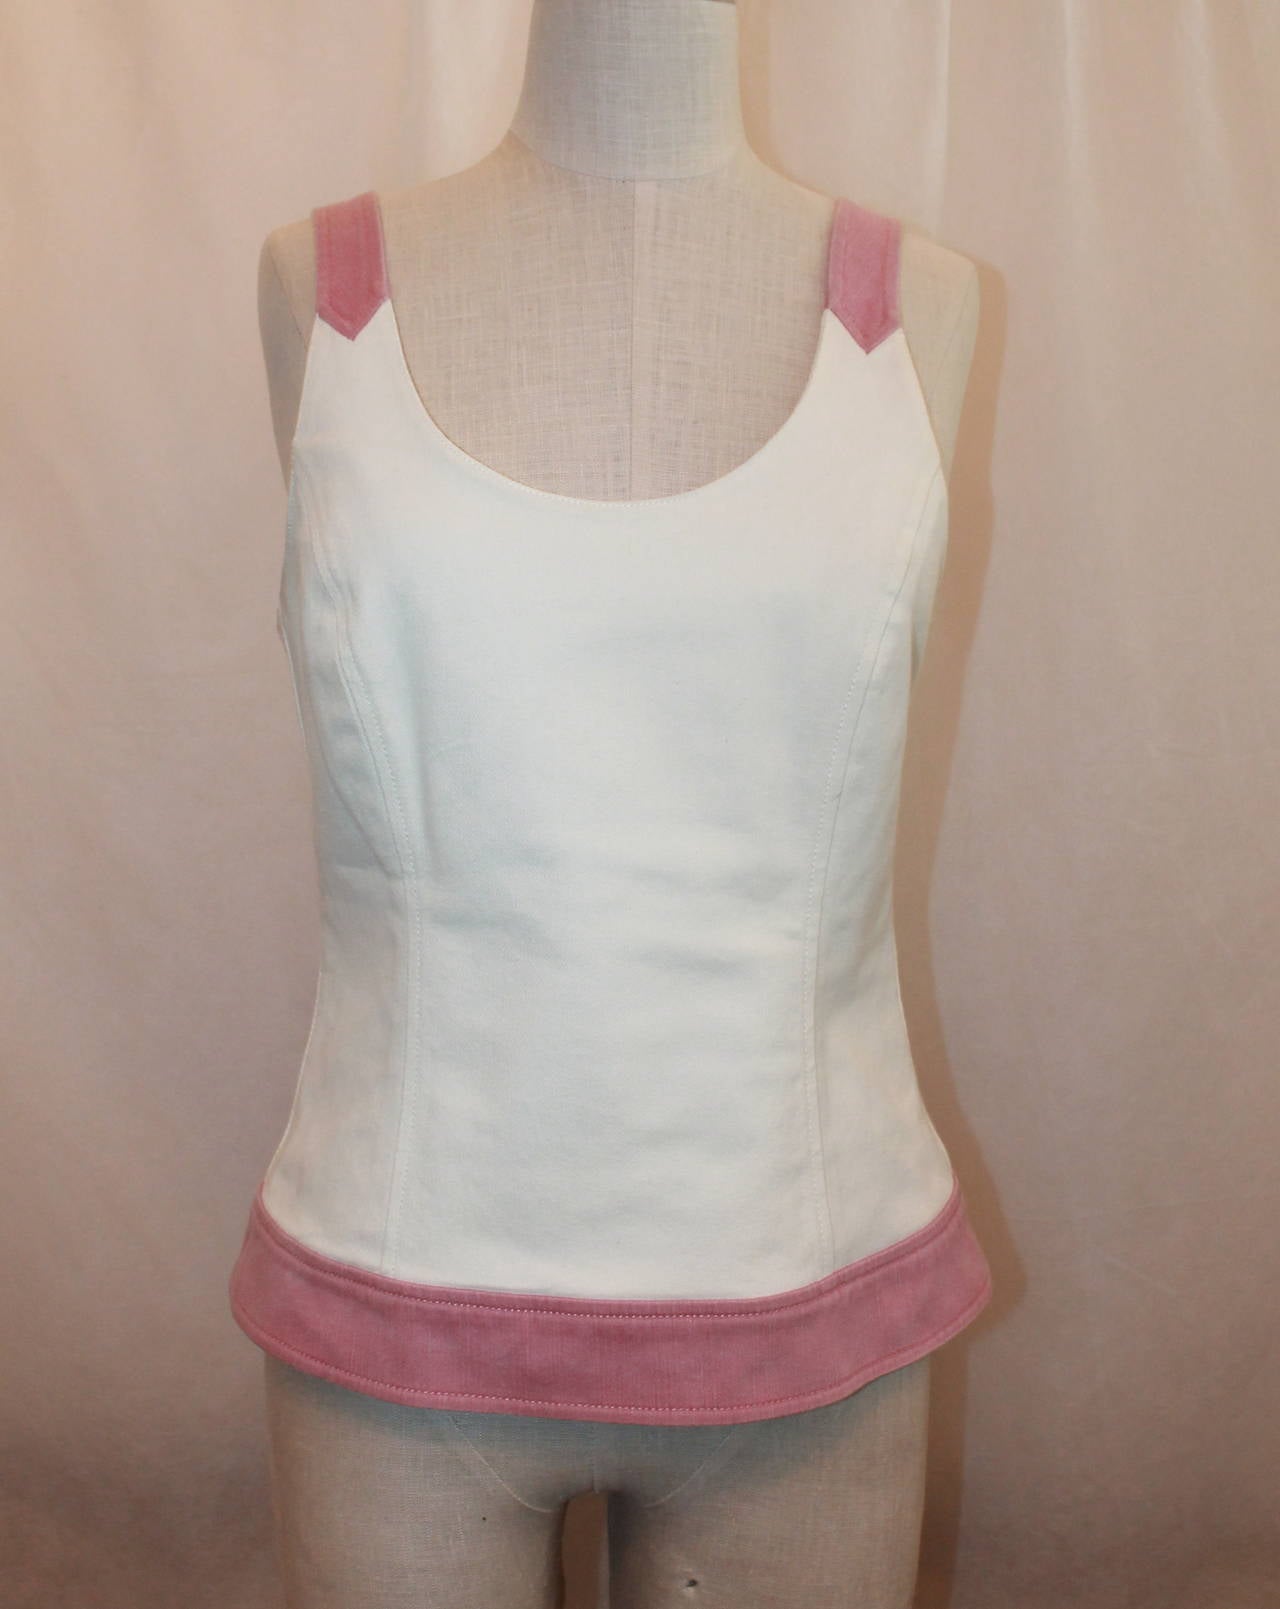 2004 White Jean Tank Top with Pink Straps and Bottom Trim. White and Pink Chanel Buttons on Back. Size 42.

Fabric:
98 % Cotton
2 % Spandex

Measurements:
Bust: 34 